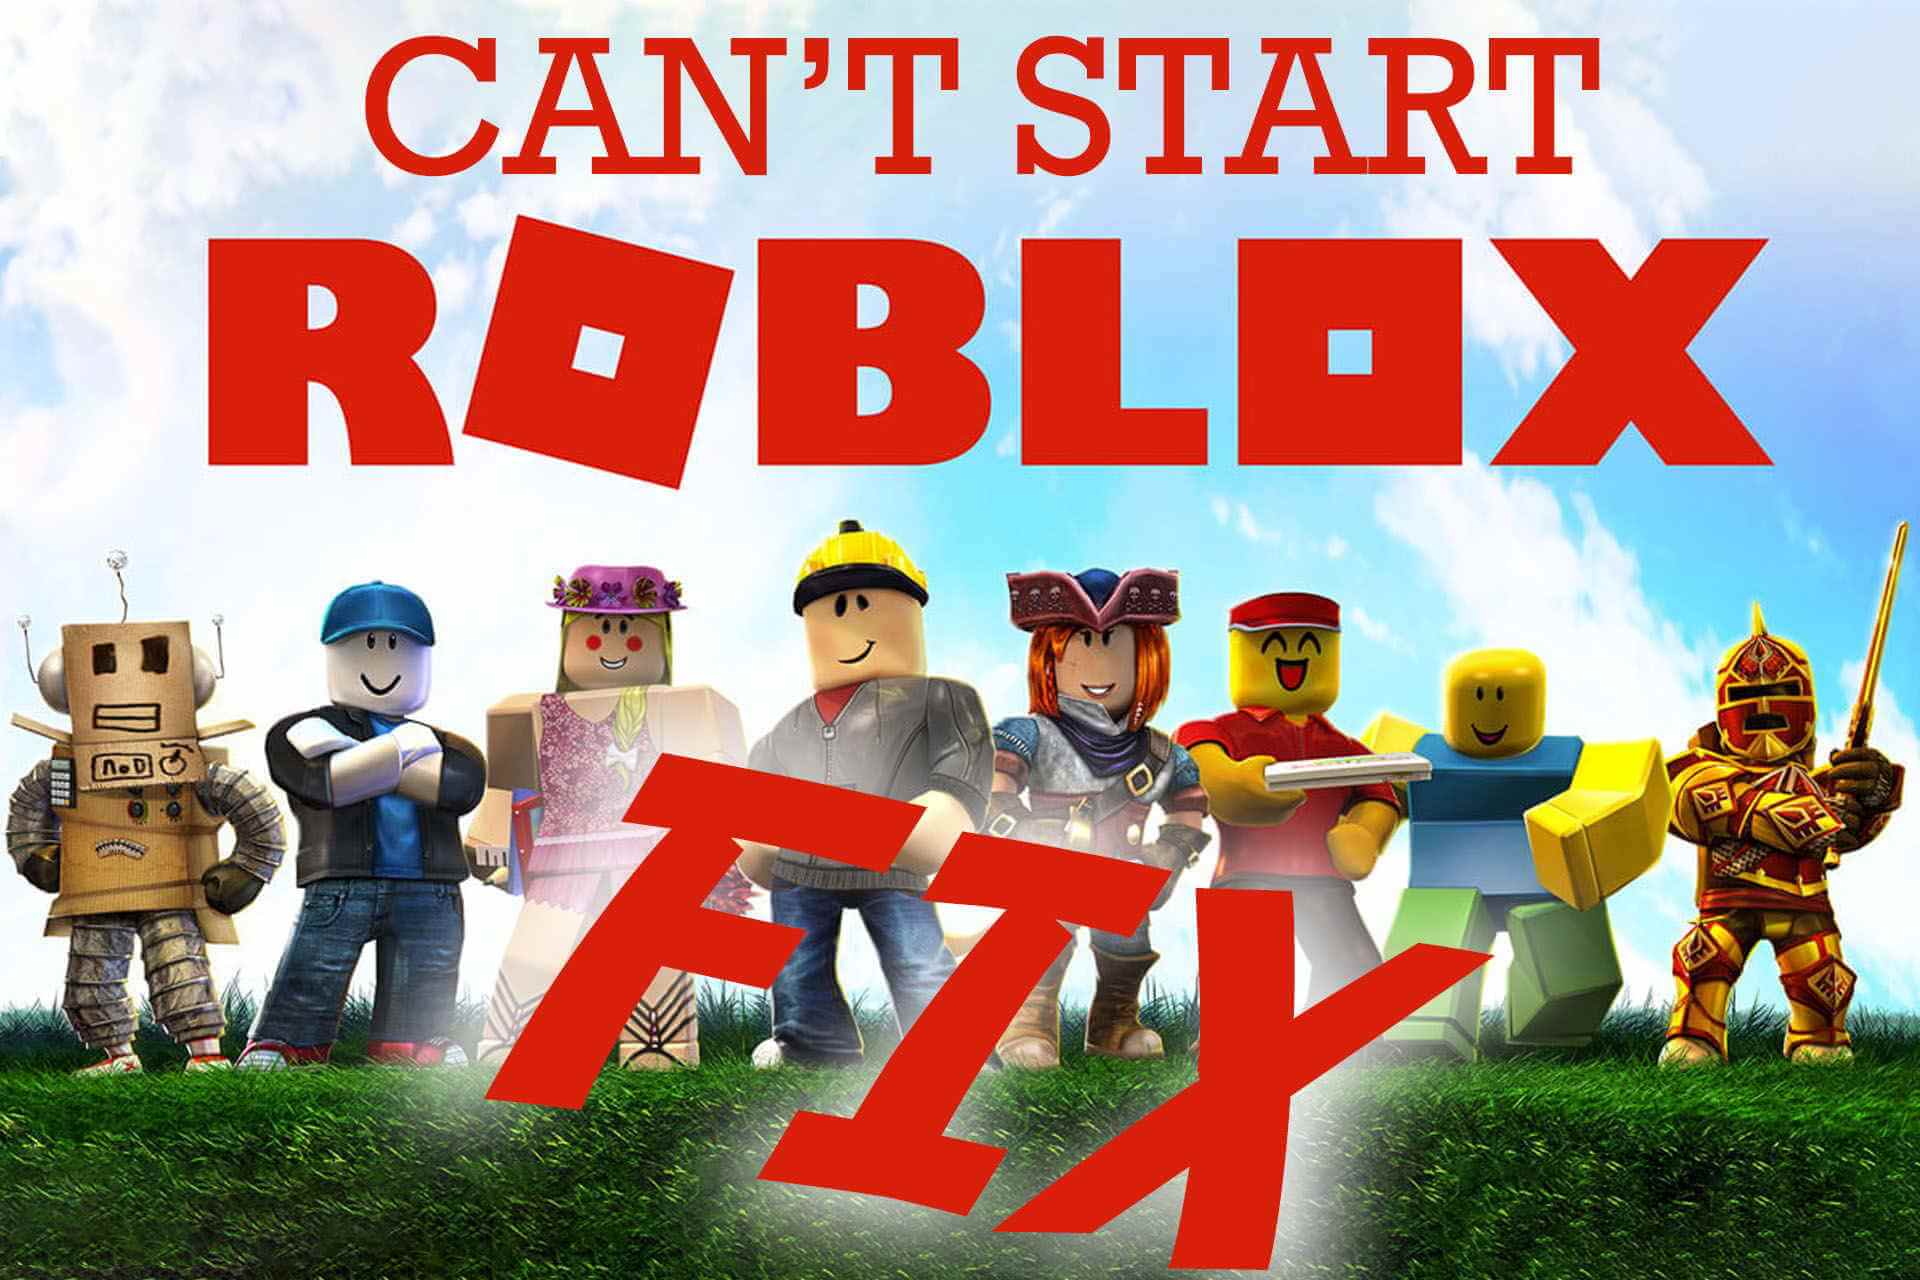 Roblox Gift Card Issues